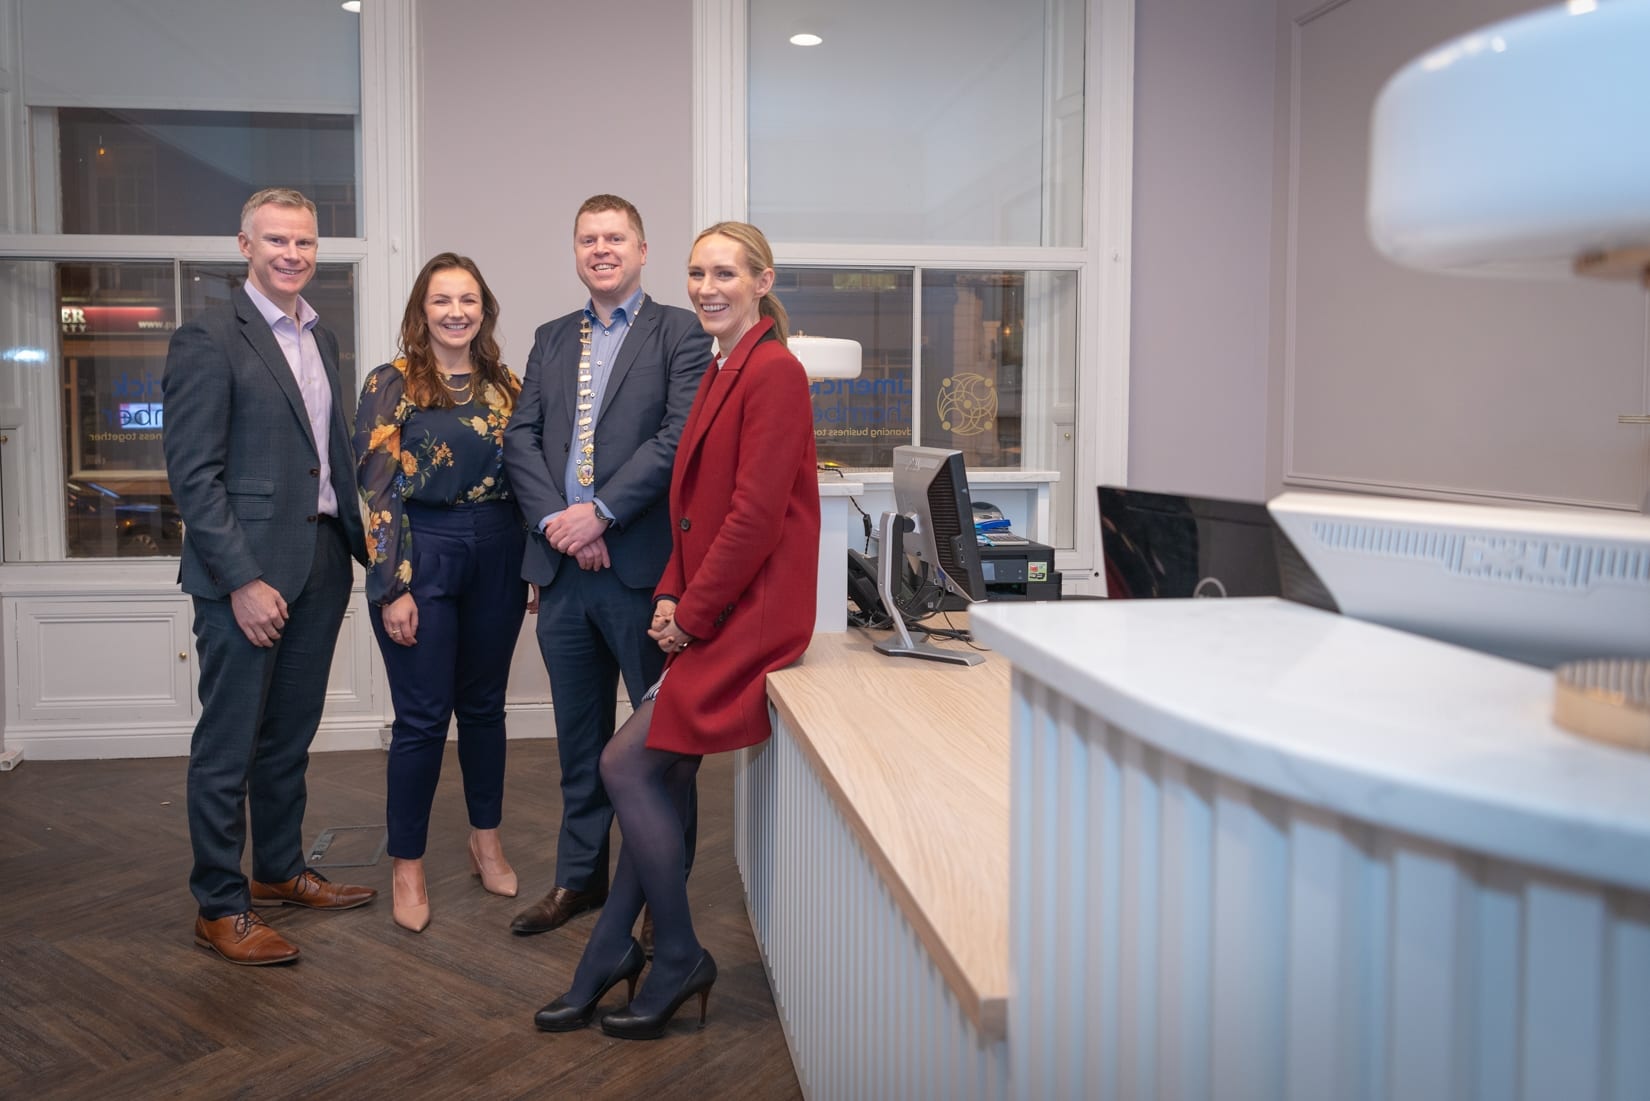 No repro fee-Limerick Chamber AGM 2020 which was held in Limerick Chamber Boardroom on Thursday 27th February - From Left to Right: Dave Jefferies - Vice President Limerick Chamber, Dr Caitriona Cahill - Limerick Chamber , Eoin Ryan - President Limerick Chamber, Dee Ryan - CEO Limerick Chamber. 
Photo credit Shauna Kennedy